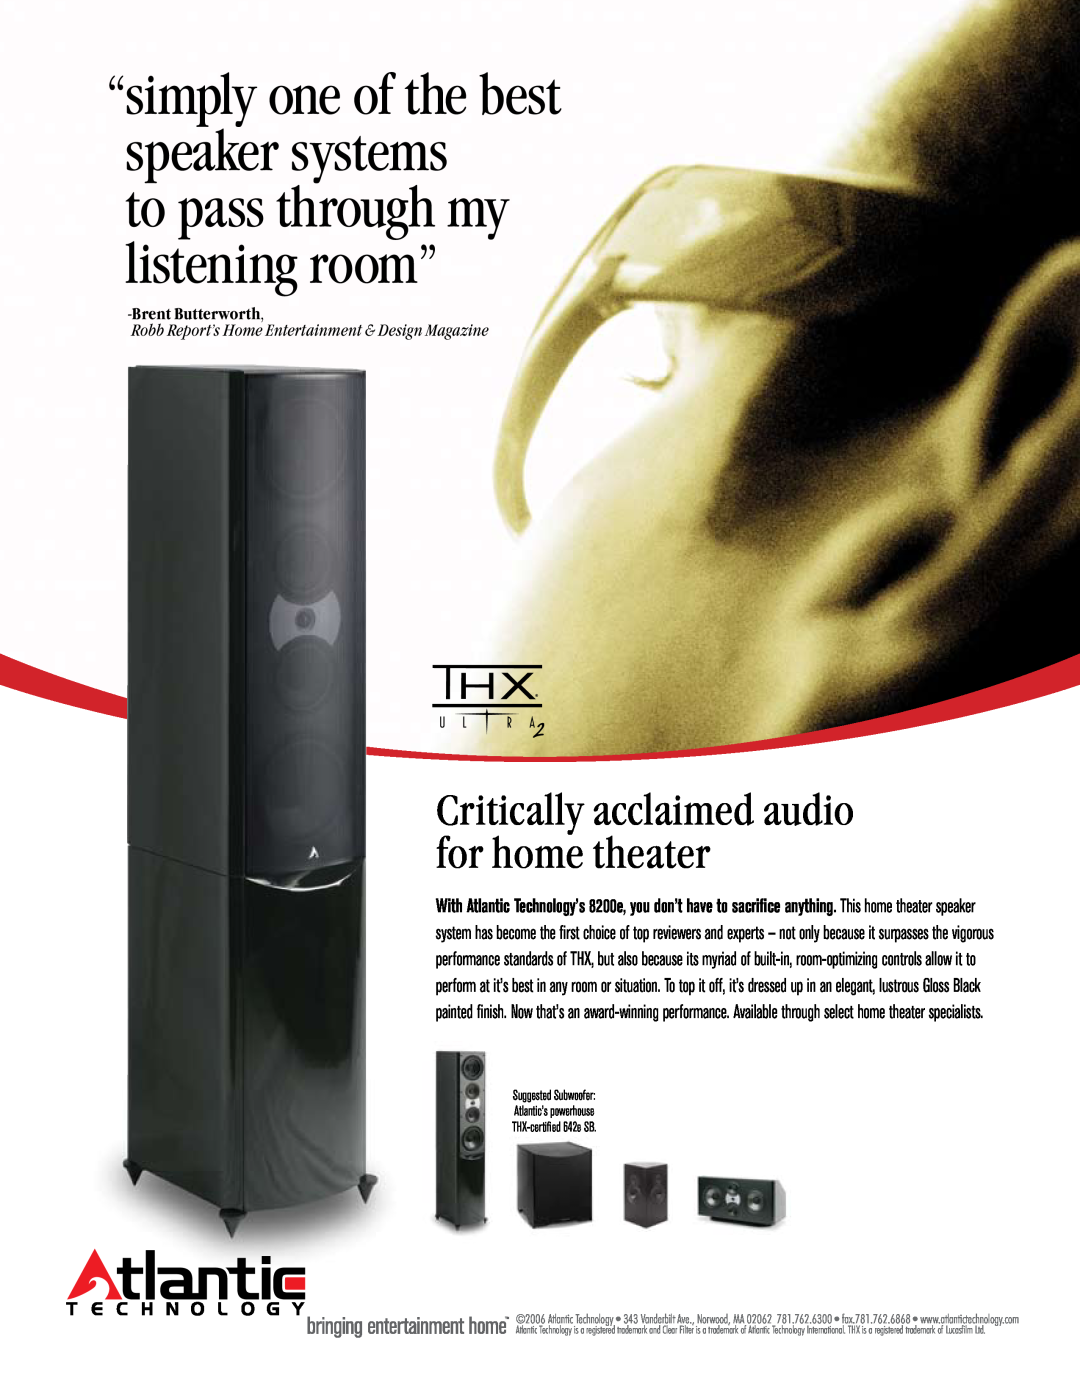 Atlantic Technology THX manual “simply one of the best speaker systems, to pass through my listening room” 